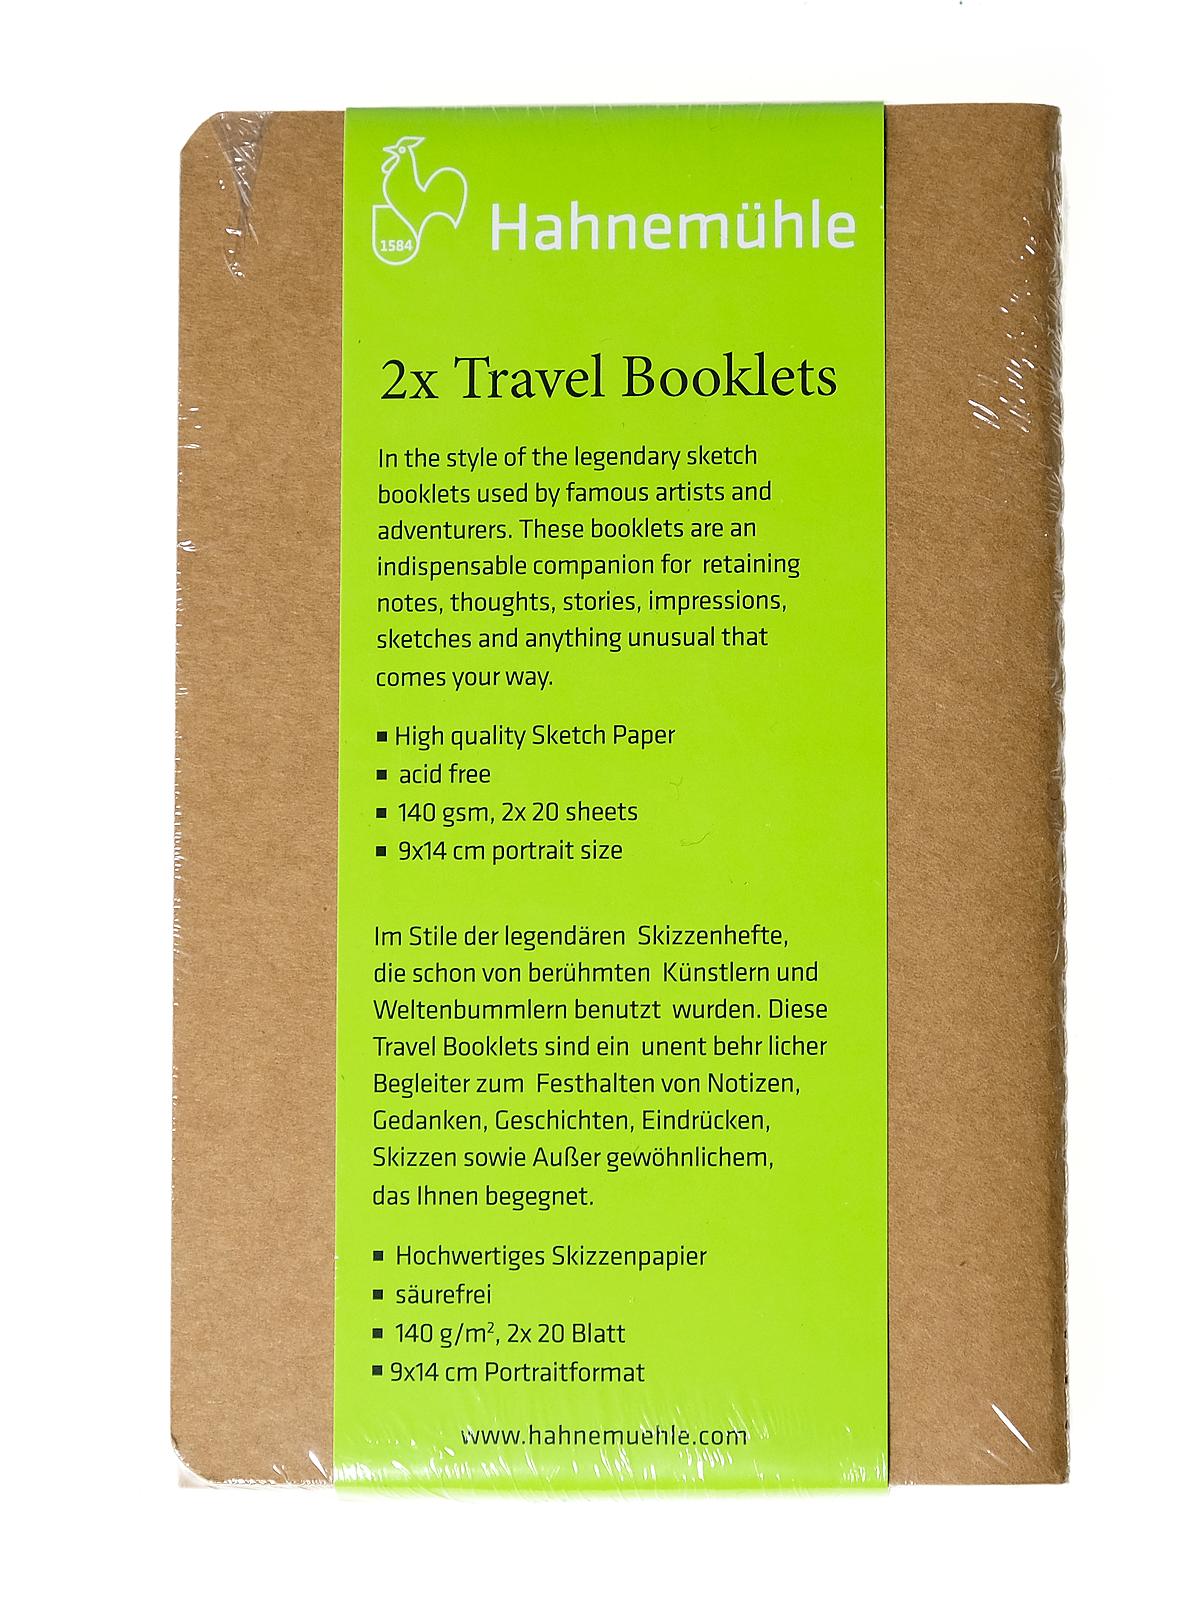 Travel Journals & Booklets 3.51 In. X 5.46 In. 20 Sheets Pack Of 2